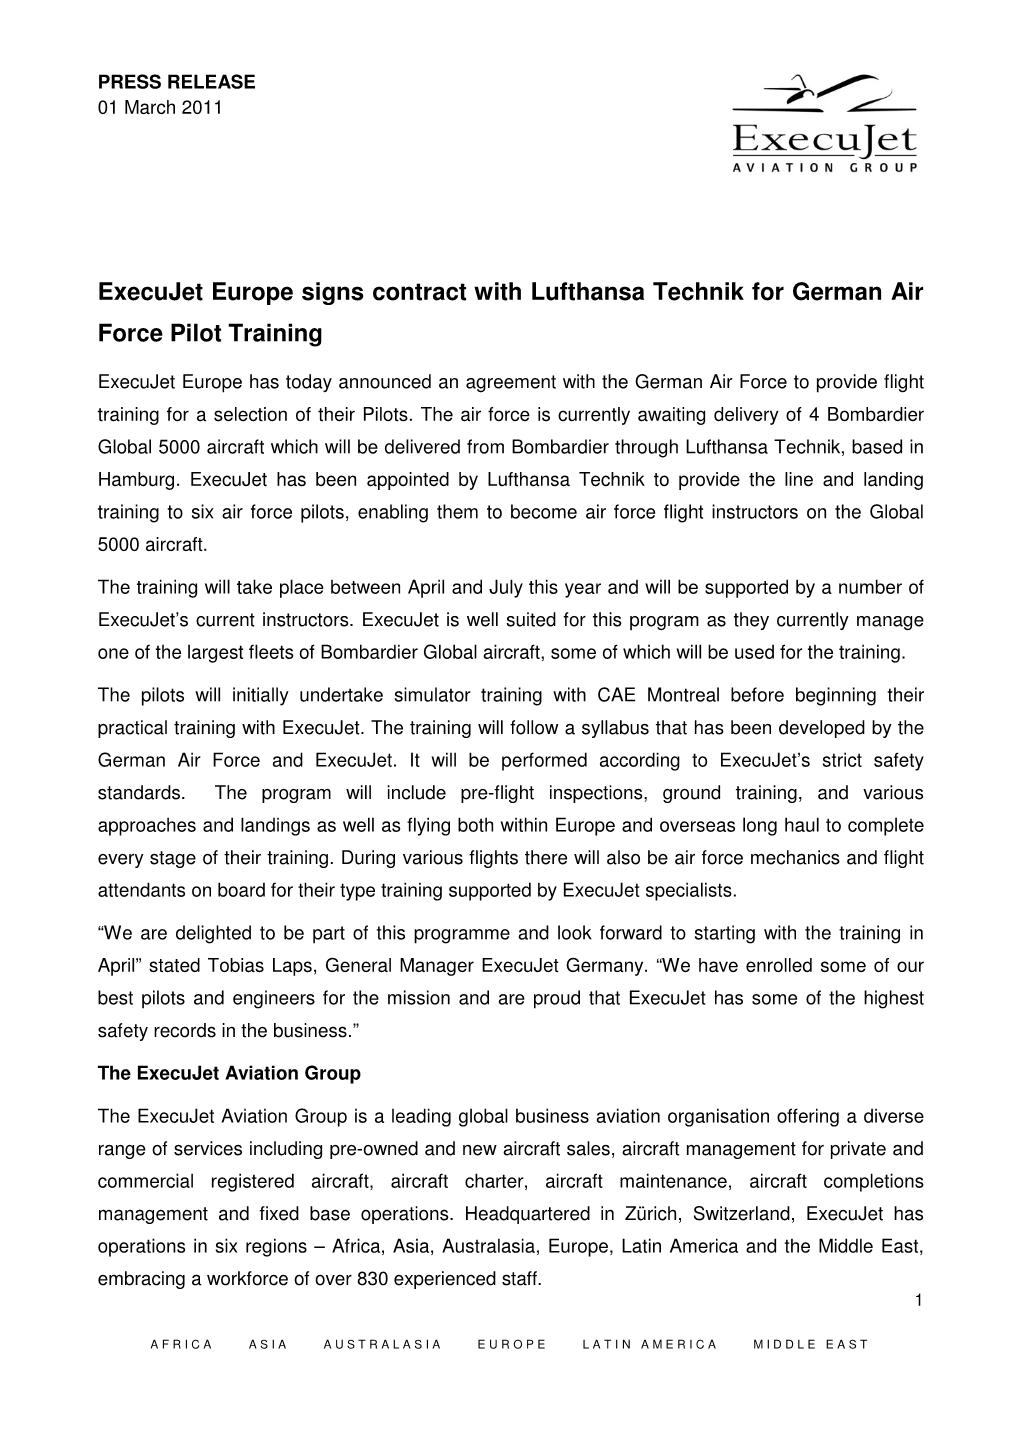 Execujet Europe Signs Contract with Lufthansa Technik for German Air Force Pilot Training